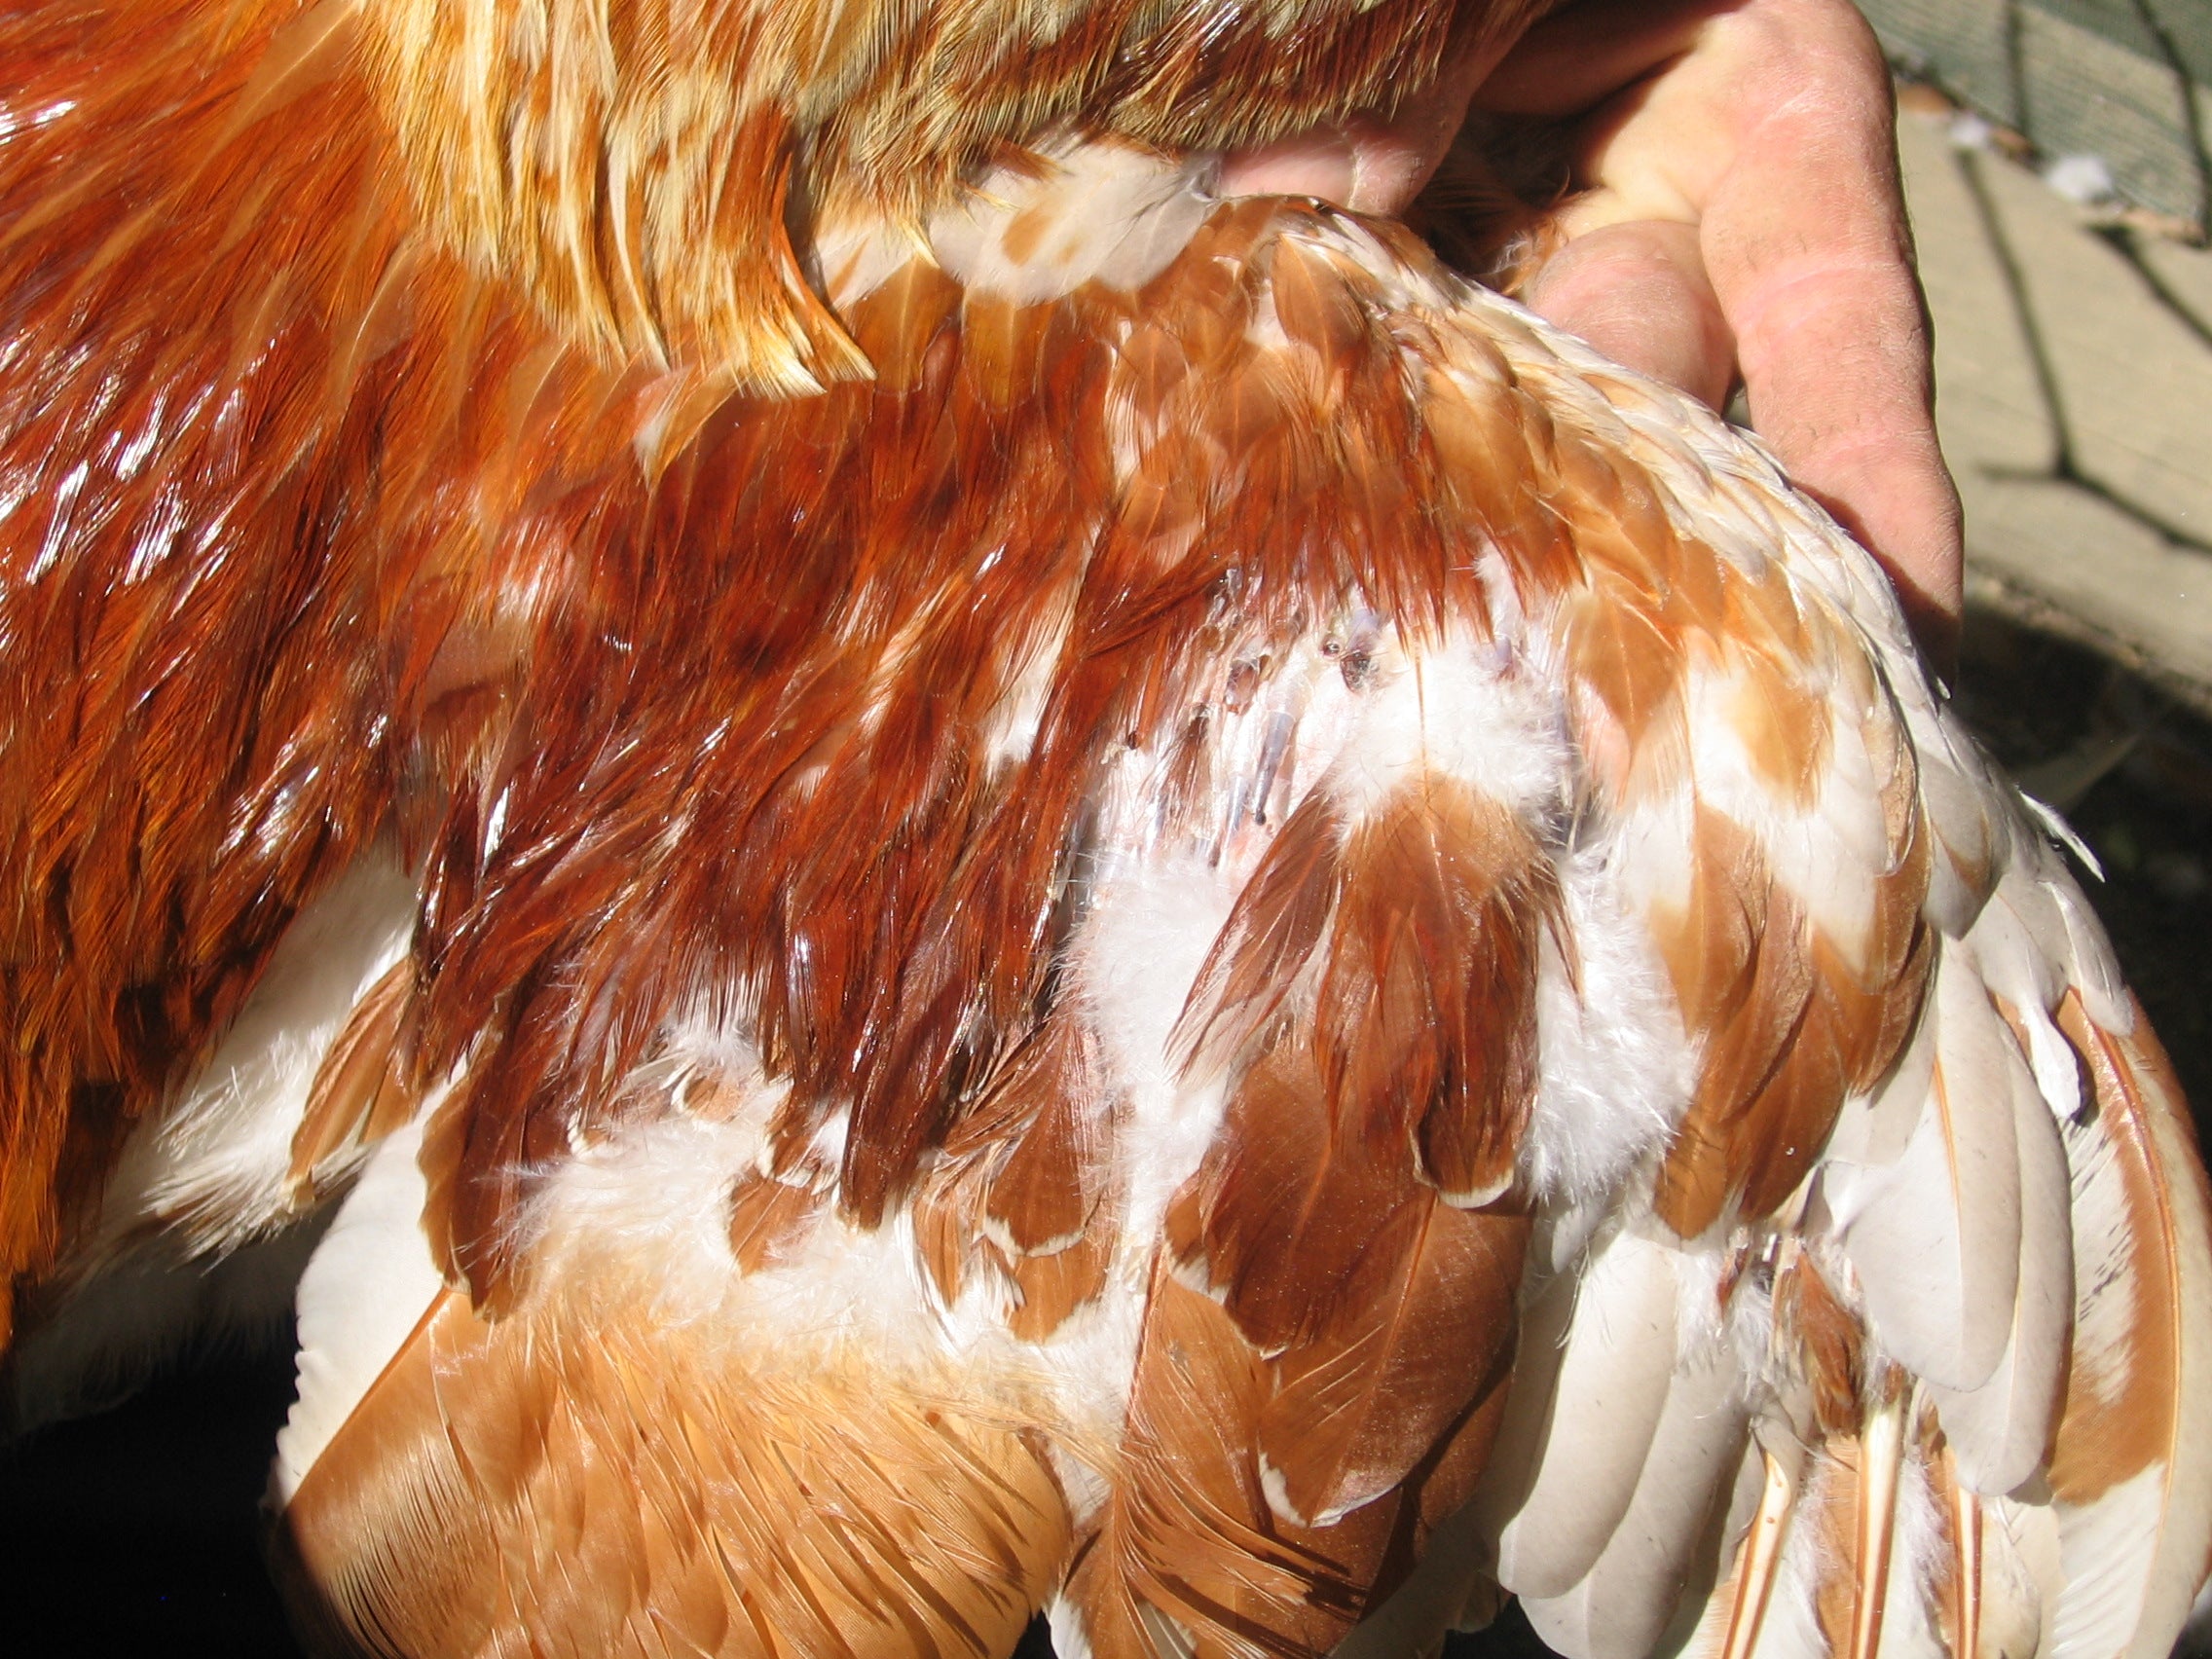 The moult is complete when all primary flight feathers on the wing are replaced